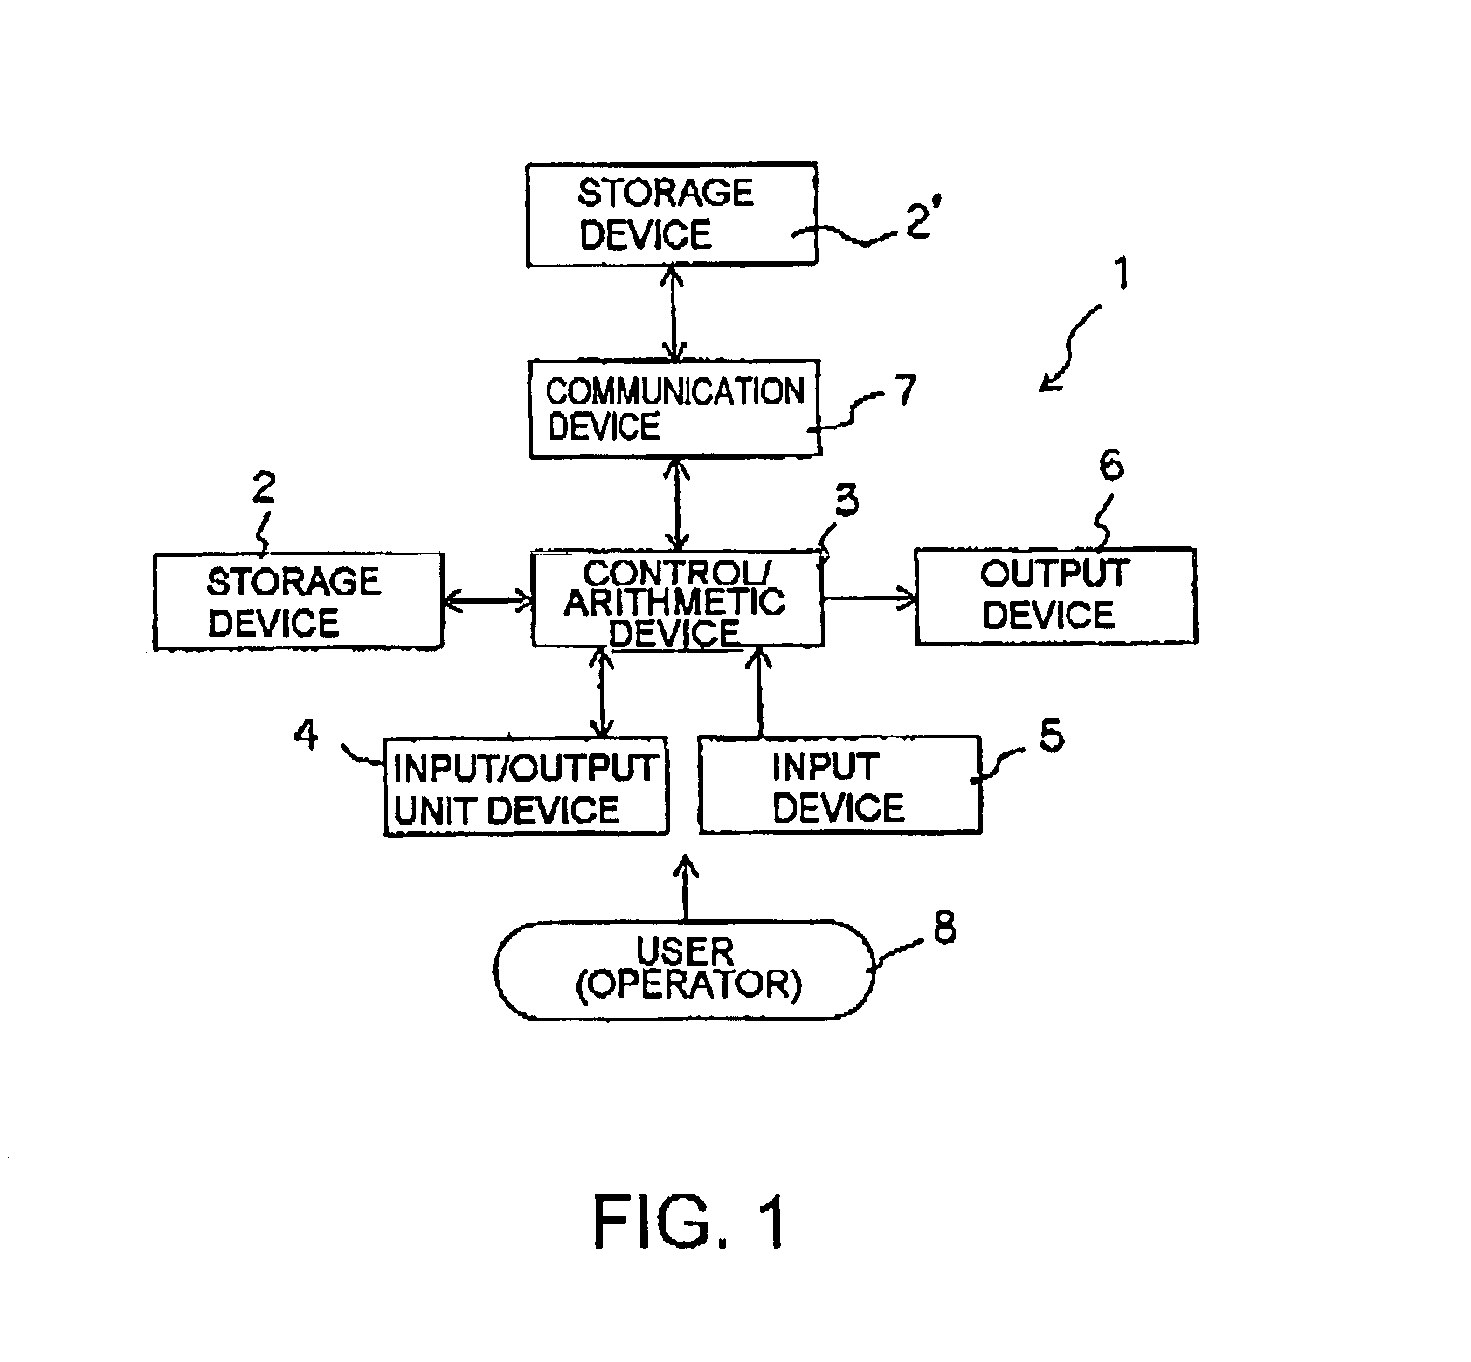 Electronic record system and control program device with display and tablet function for manipulating display area functions with pen stylus